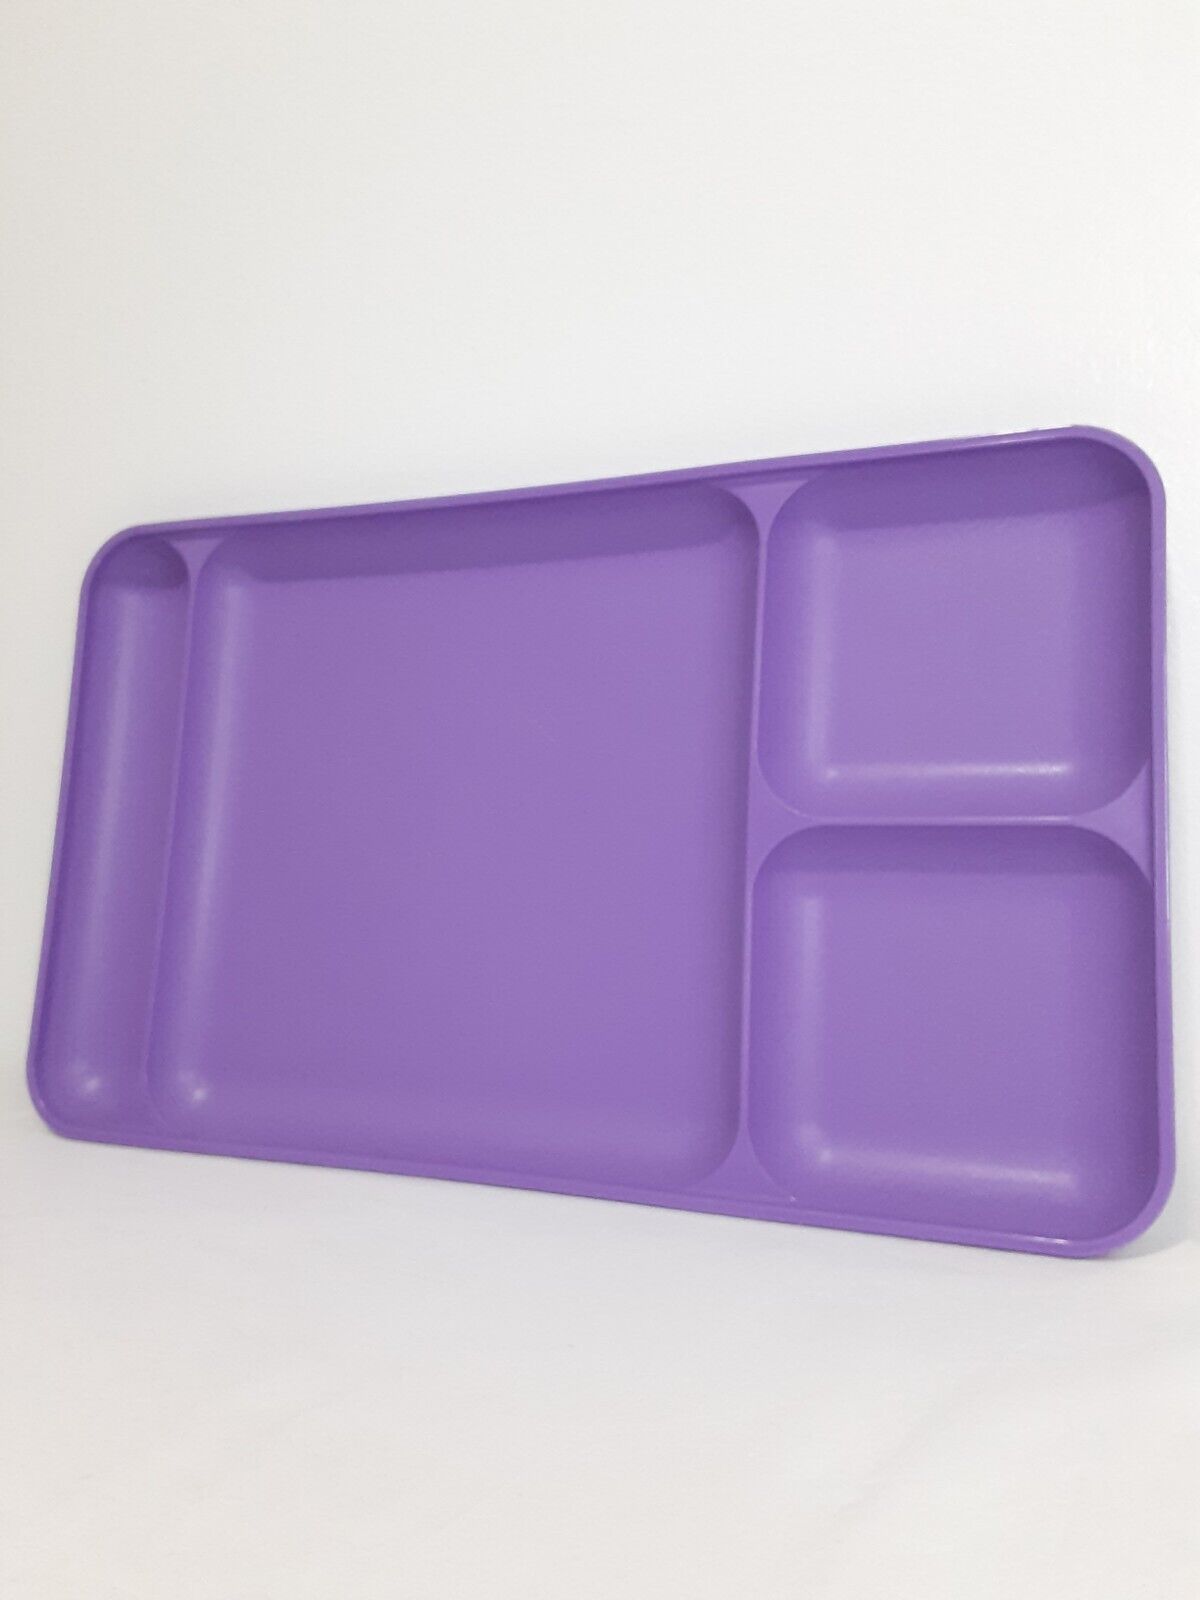 Vintage Tupperware Divided Tray Purple Cafeteria Style